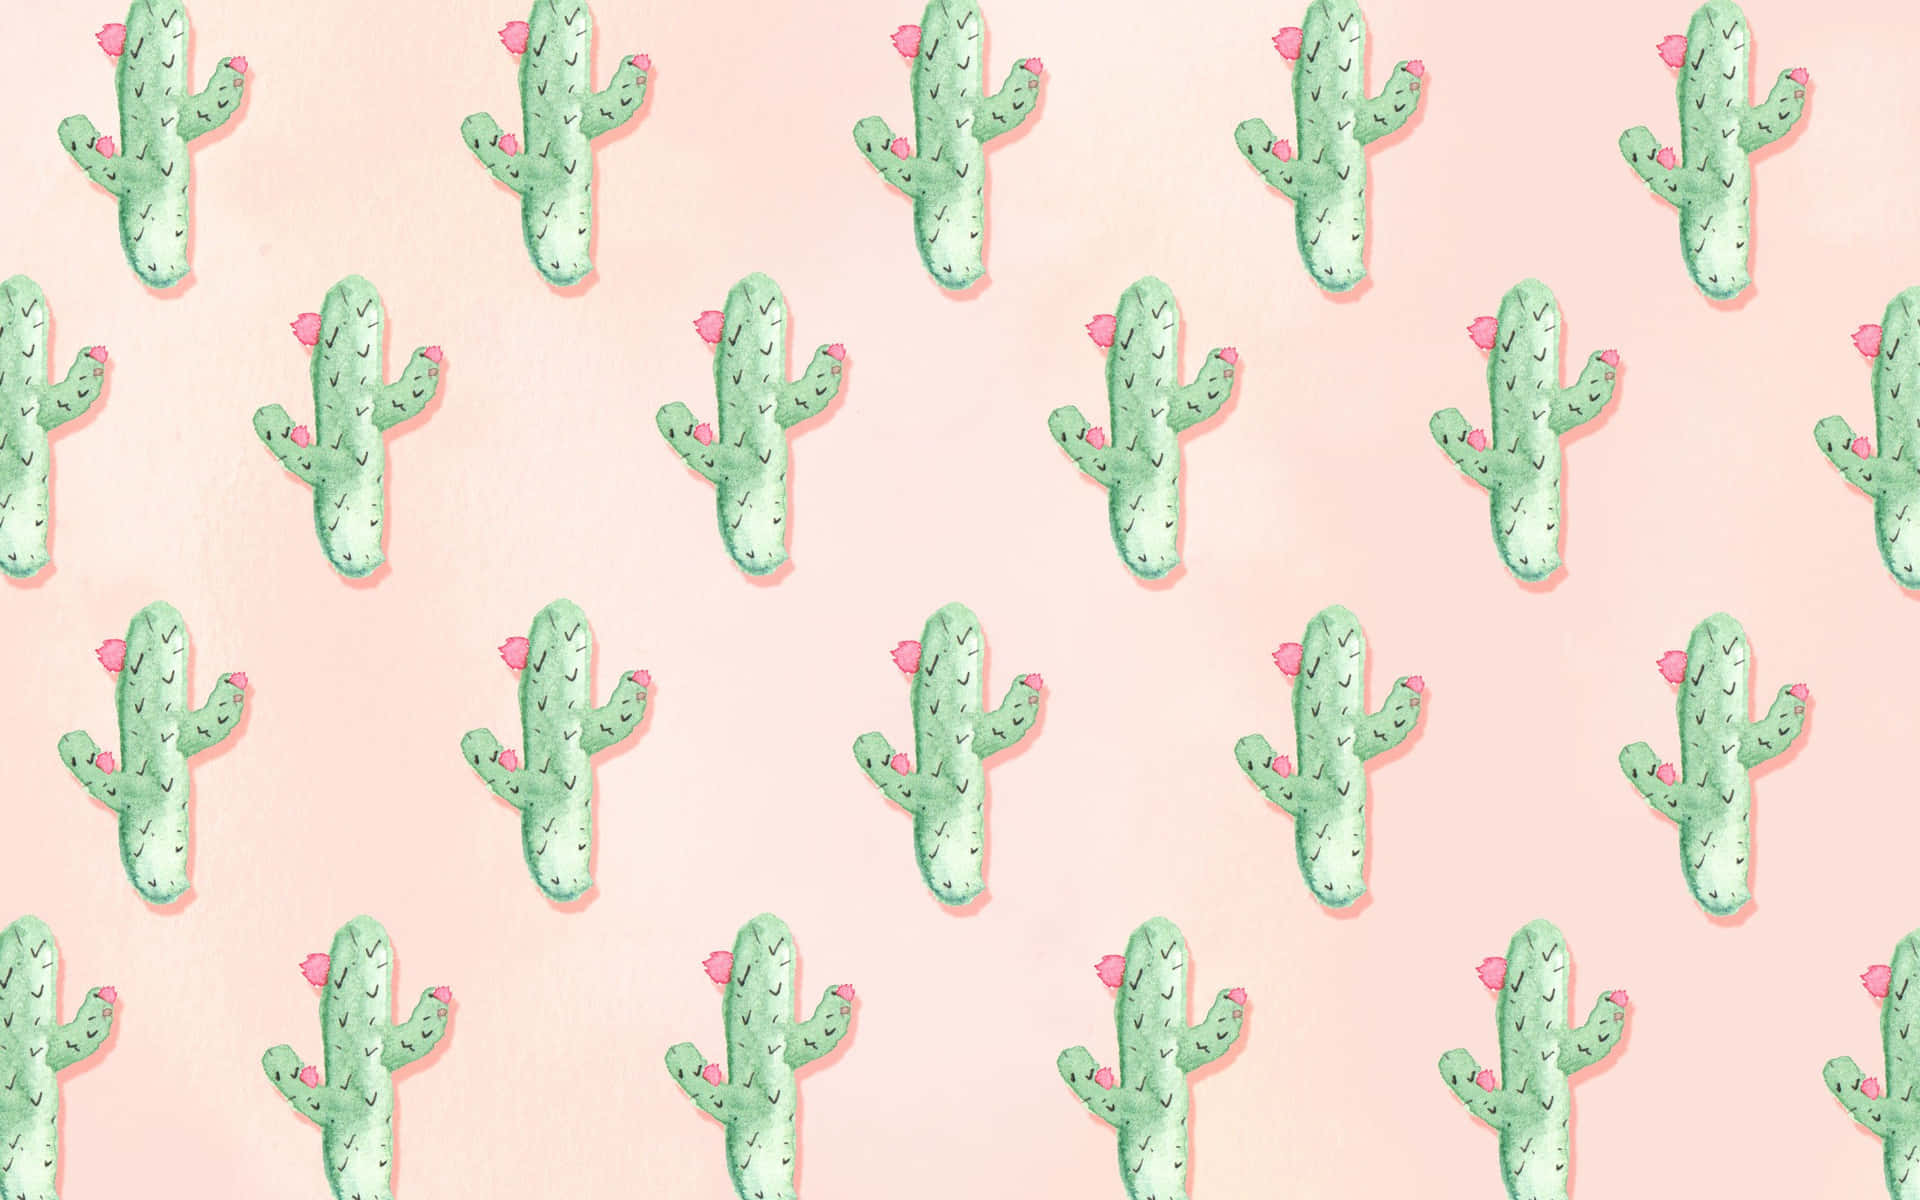 Brighten Up Your Home With A Cute Cactus! Background